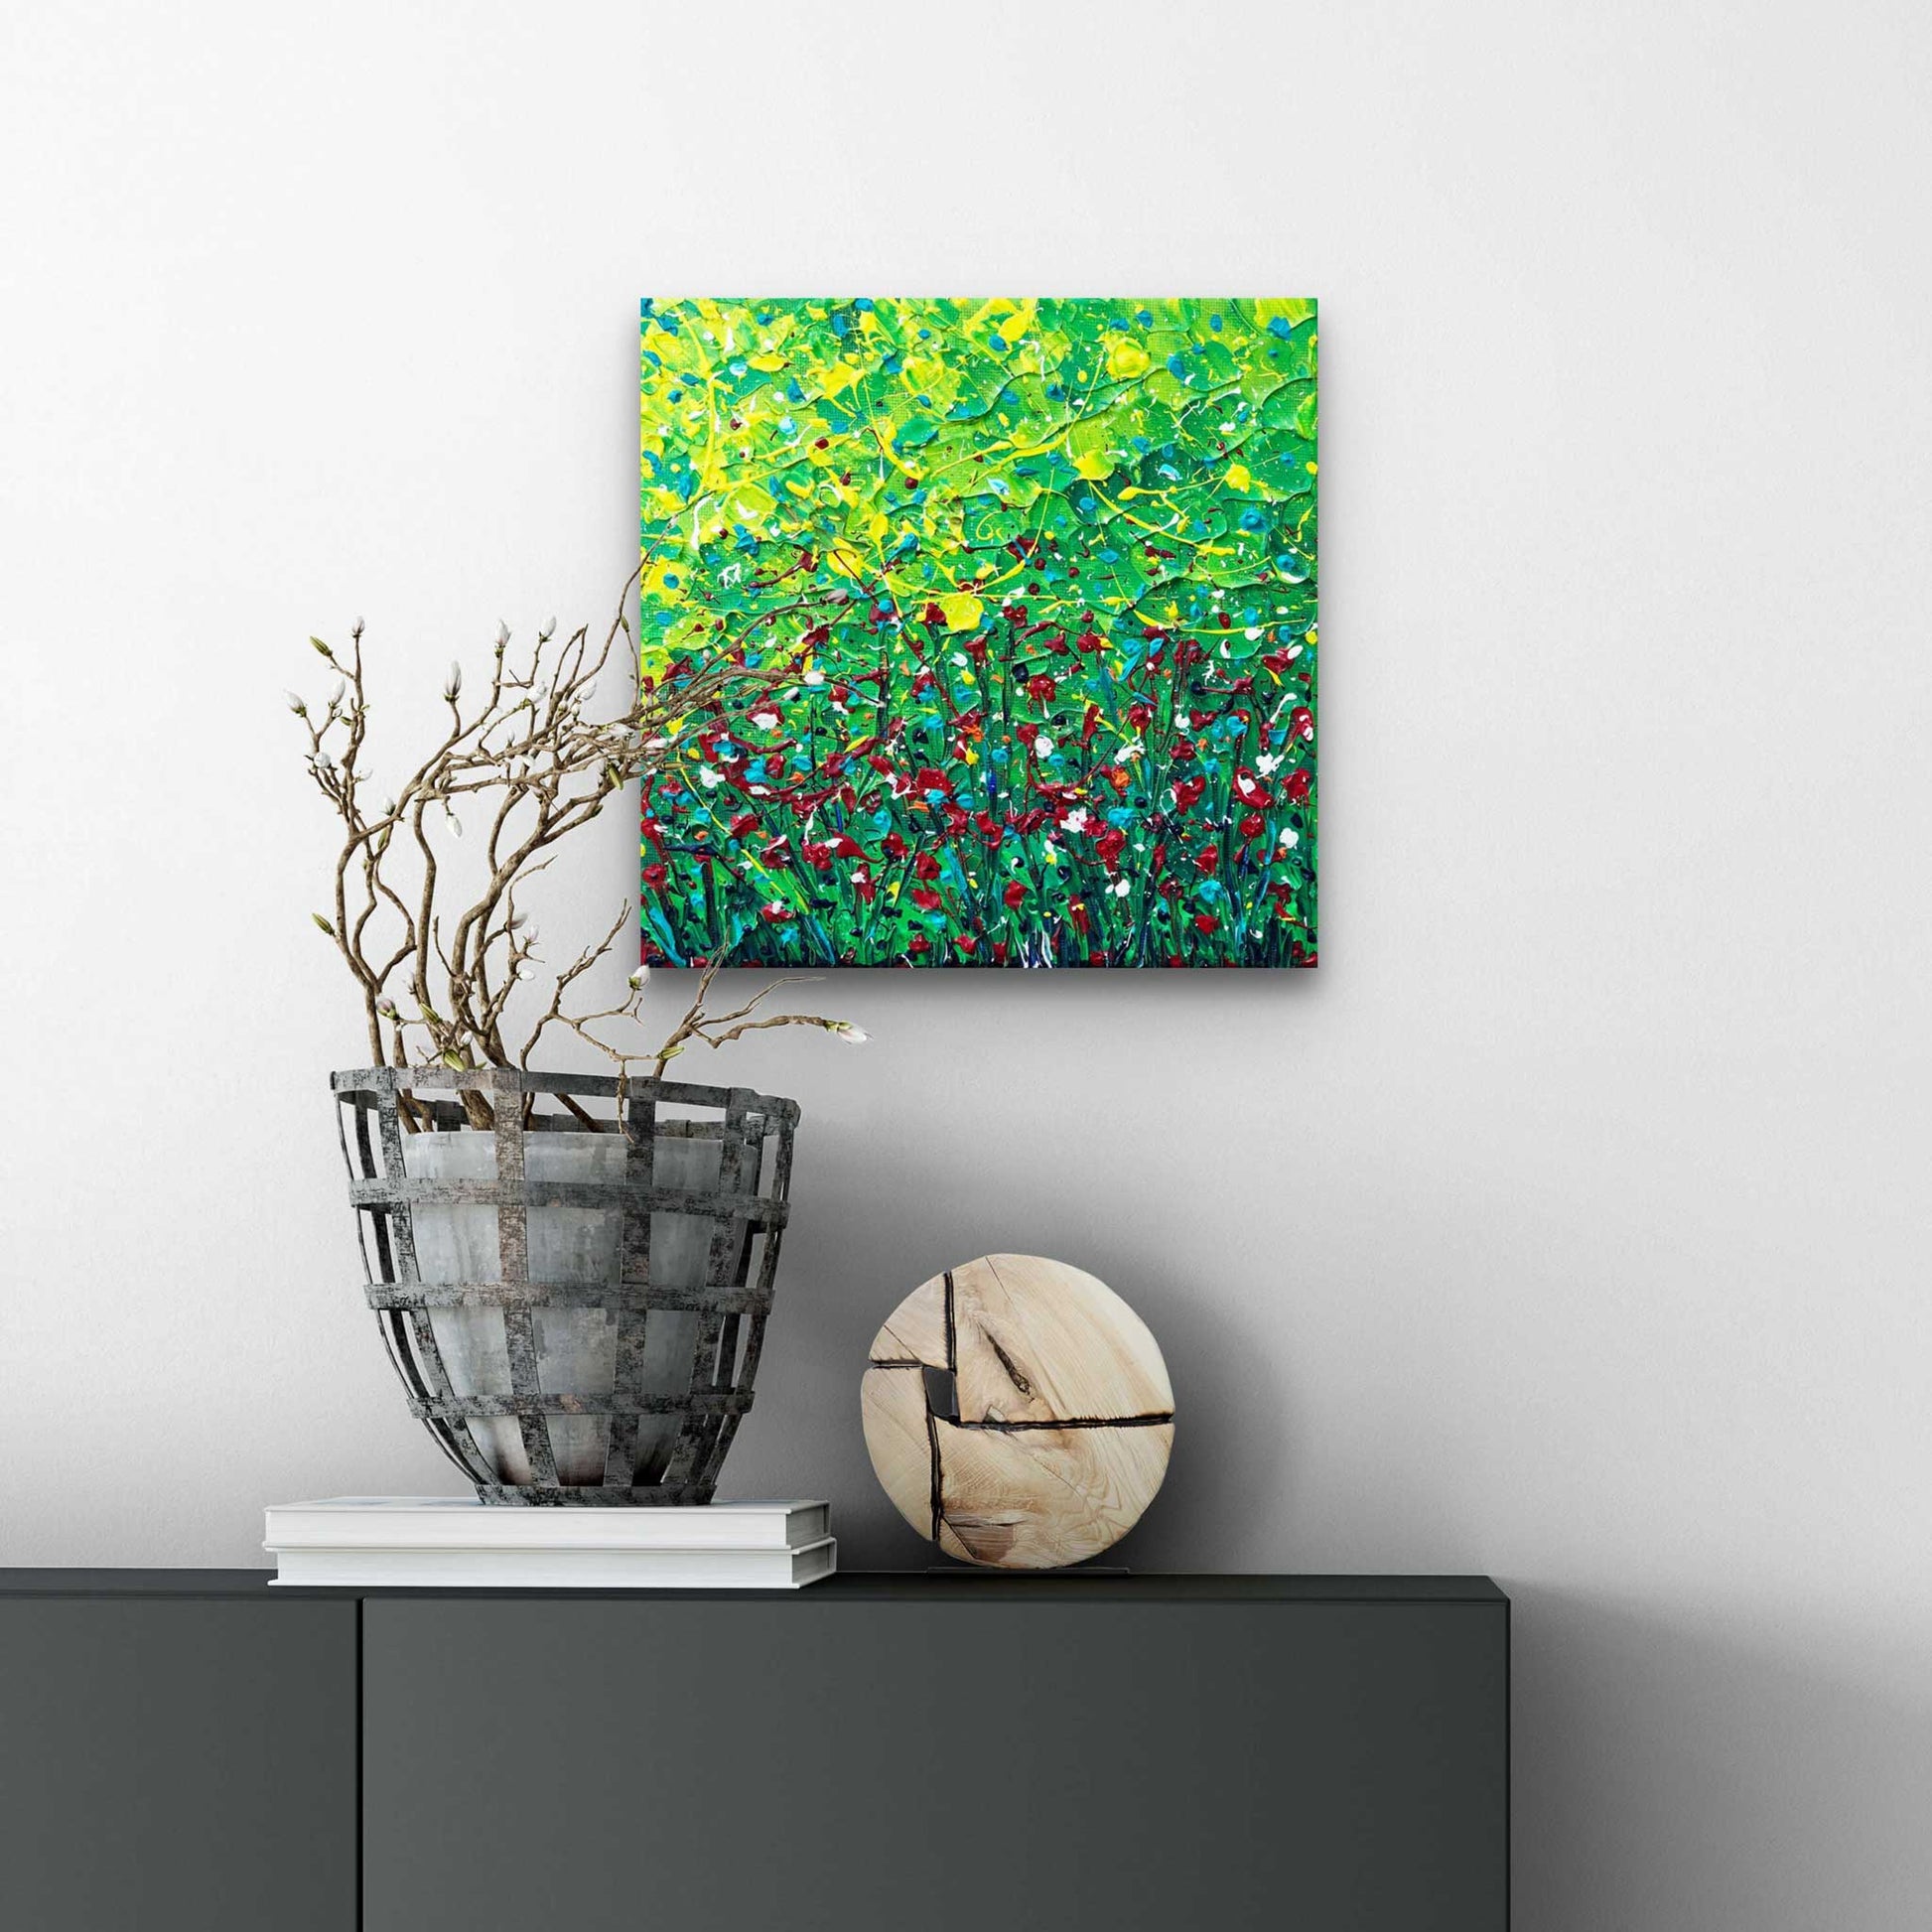 'The Wildflowers' small textured abstract painting on canvas in greens and wild flower hues. Painted by Bridget Bradley, Abstract Expressionism Artist. Learn more about this special painting